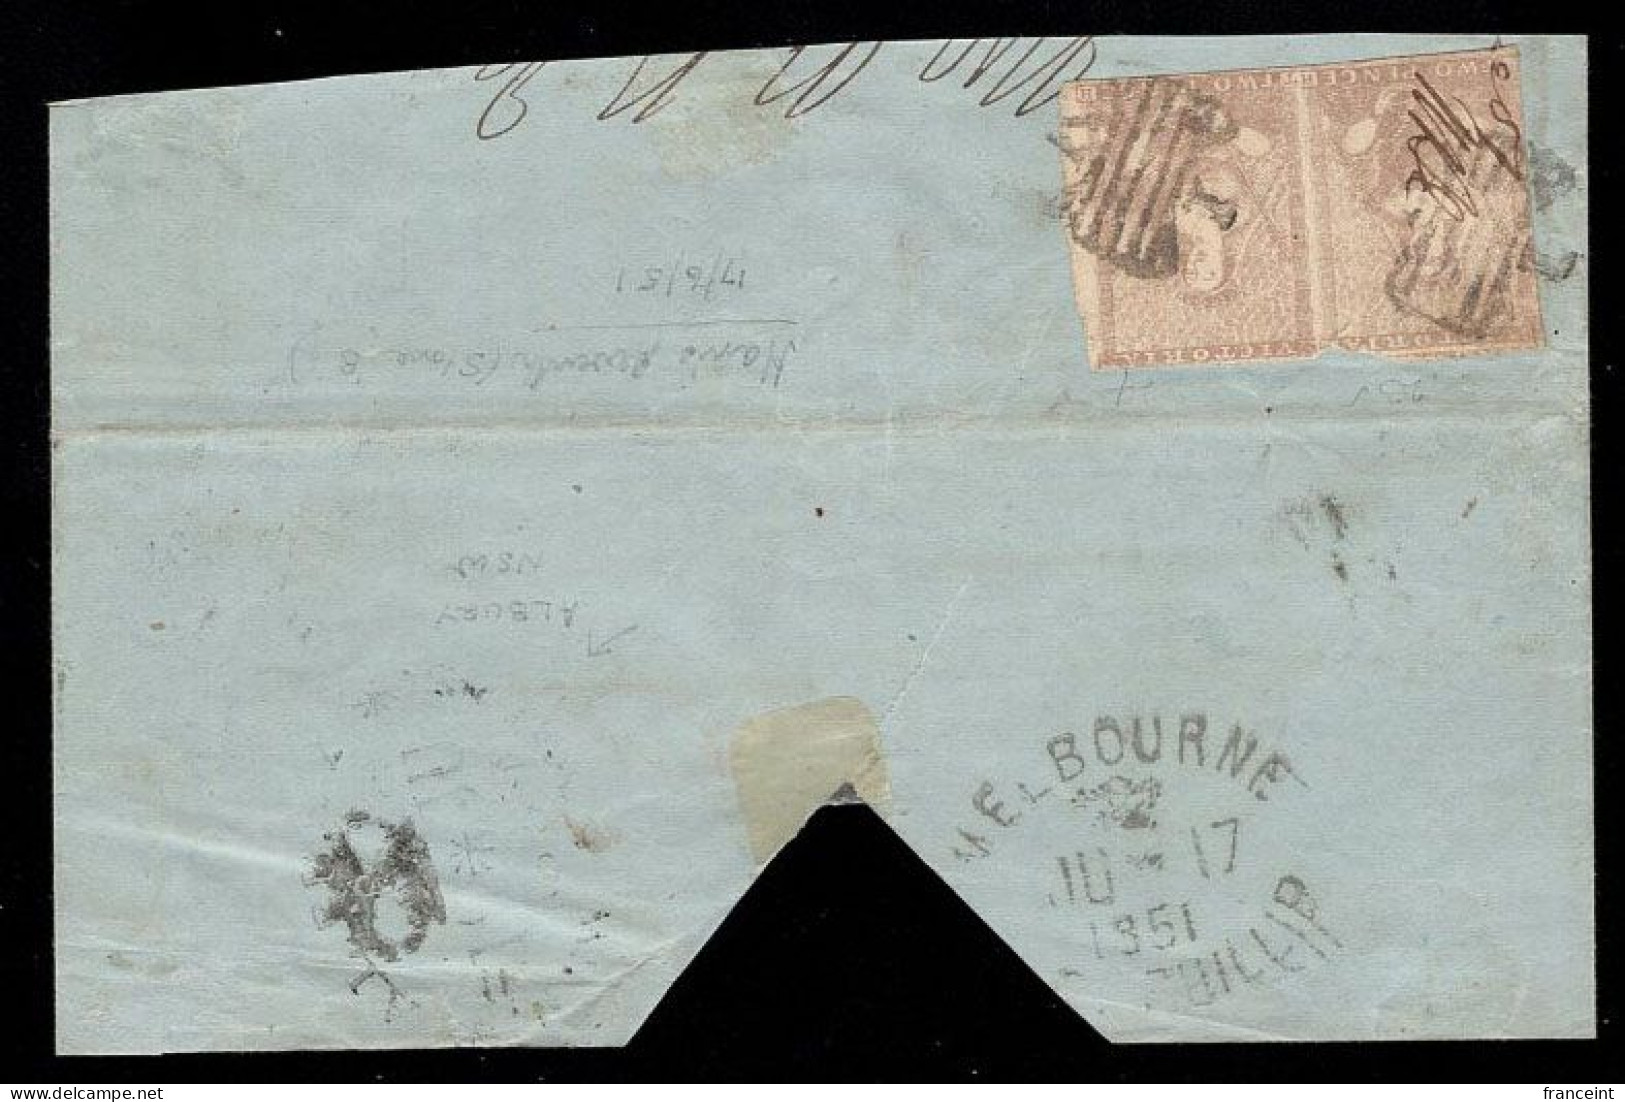 VICTORIA(1851) Butterfly Fancy Cancel In Black On Pair Of Scott No 7A On Envelope Front. Rare Exhibit Item! - Lettres & Documents